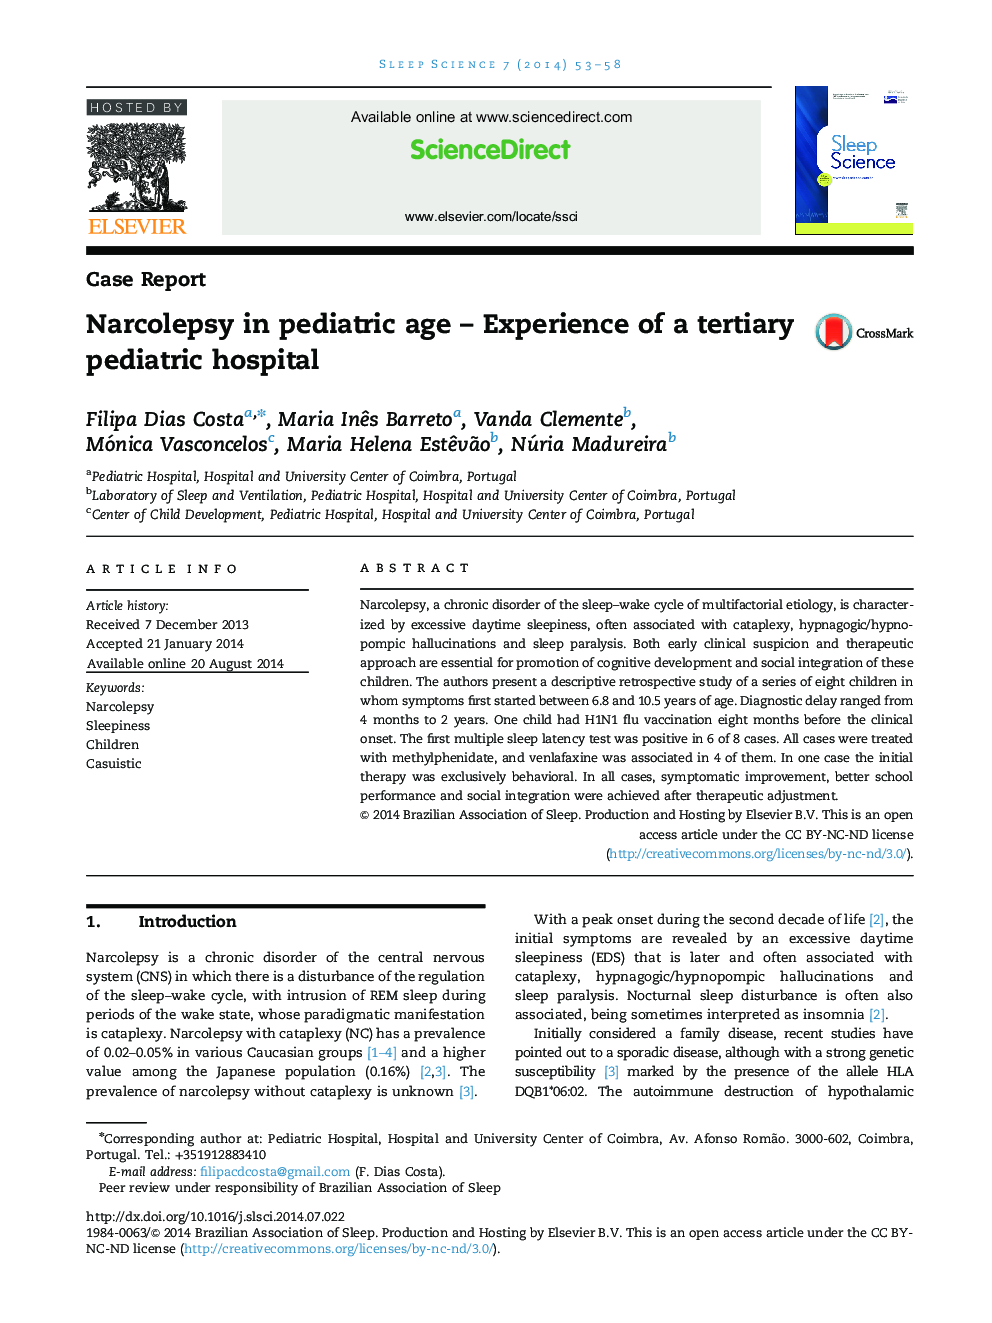 Narcolepsy in pediatric age – Experience of a tertiary pediatric hospital 